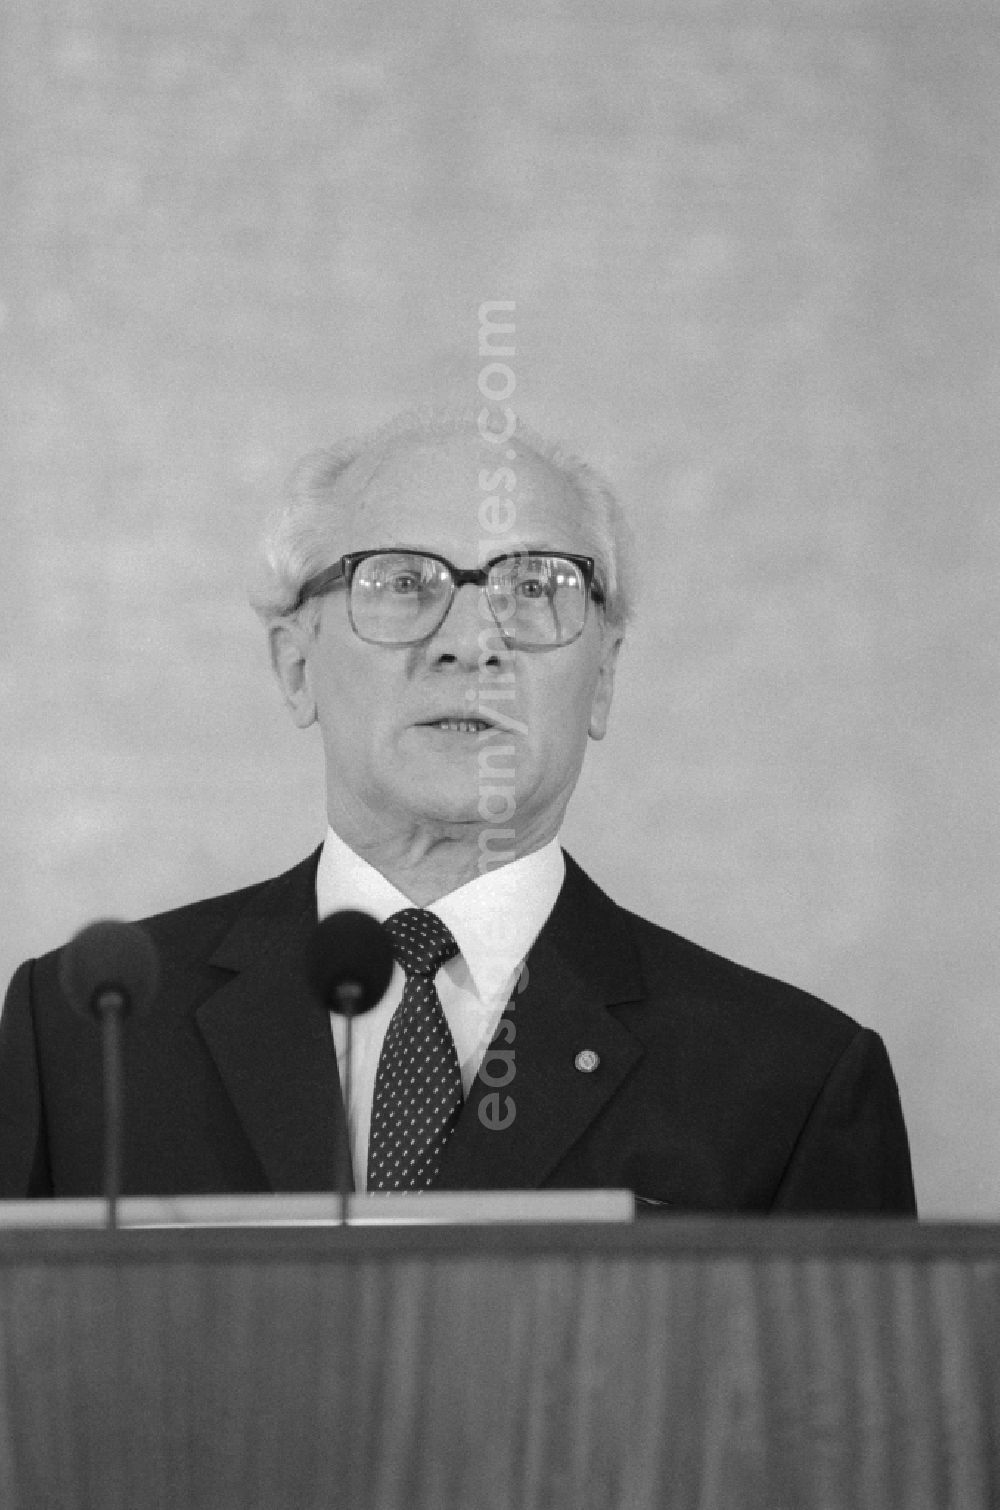 GDR photo archive: Berlin - Erich Honecker (1912 - 1994), general secretary of the Central Committee (ZK) of the SED, in Berlin, the former capital of the GDR, the German Democratic Republic